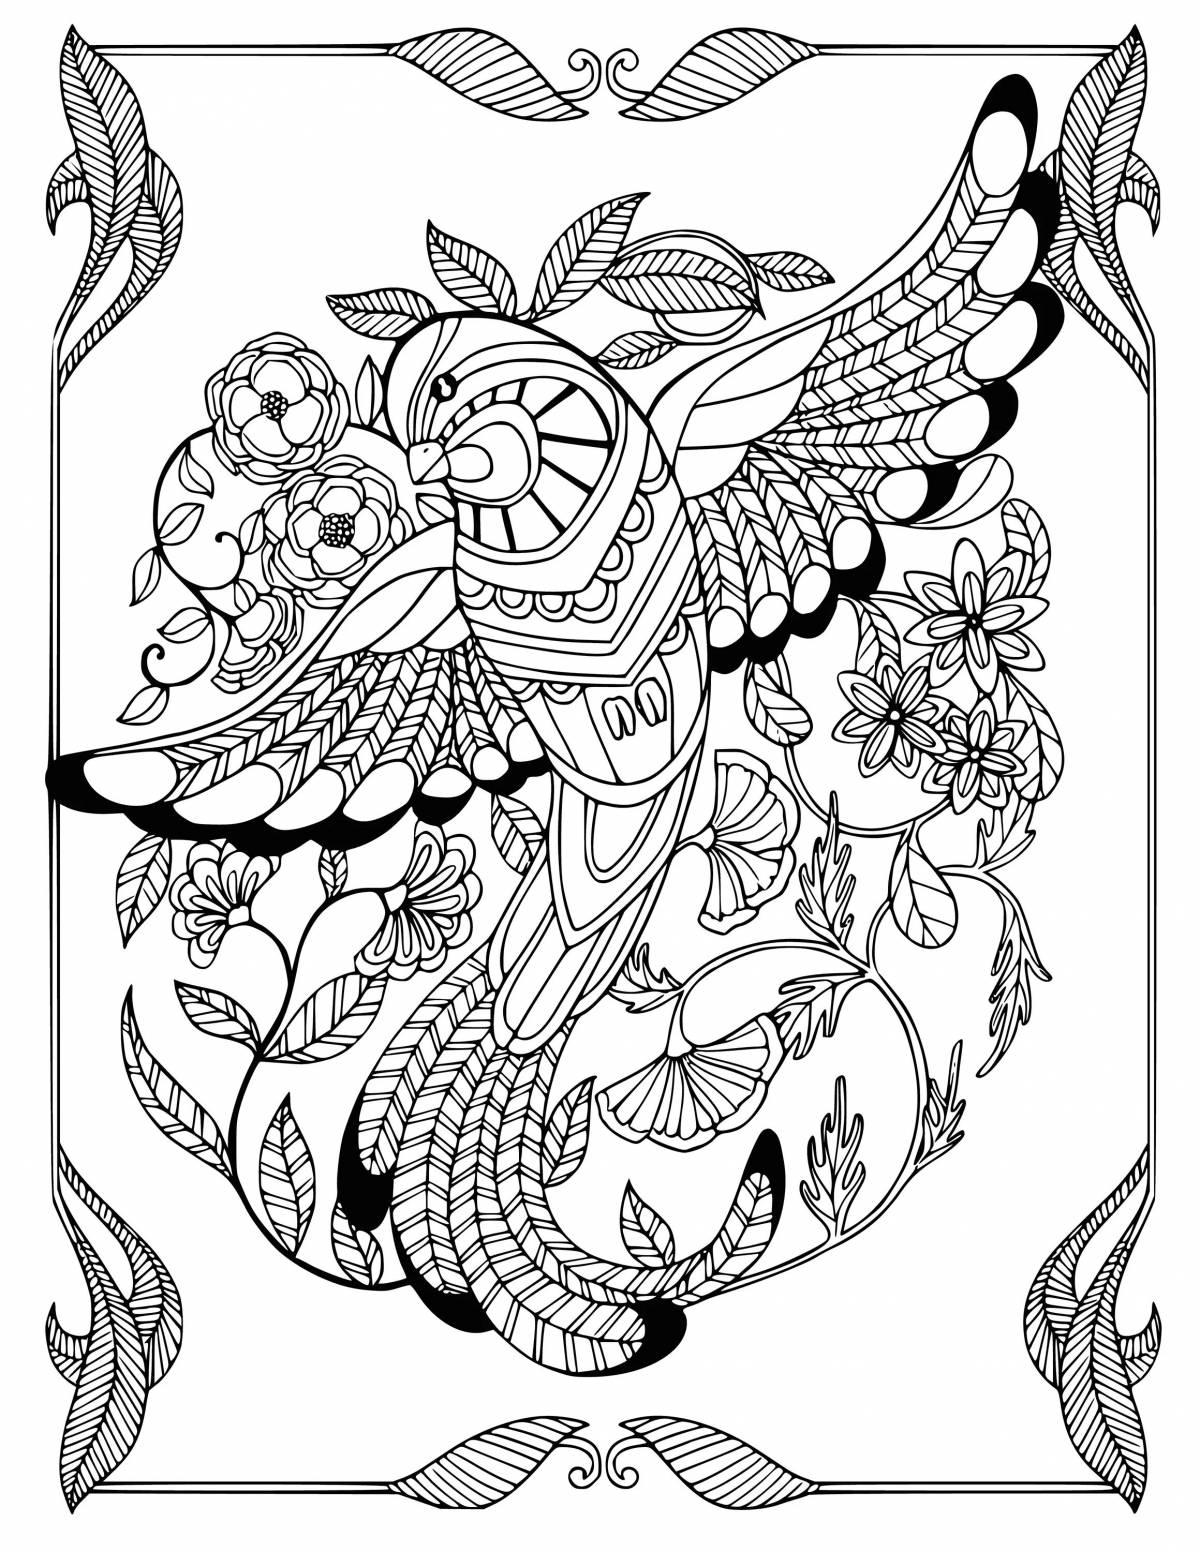 Live coloring relaxation antistress for adults